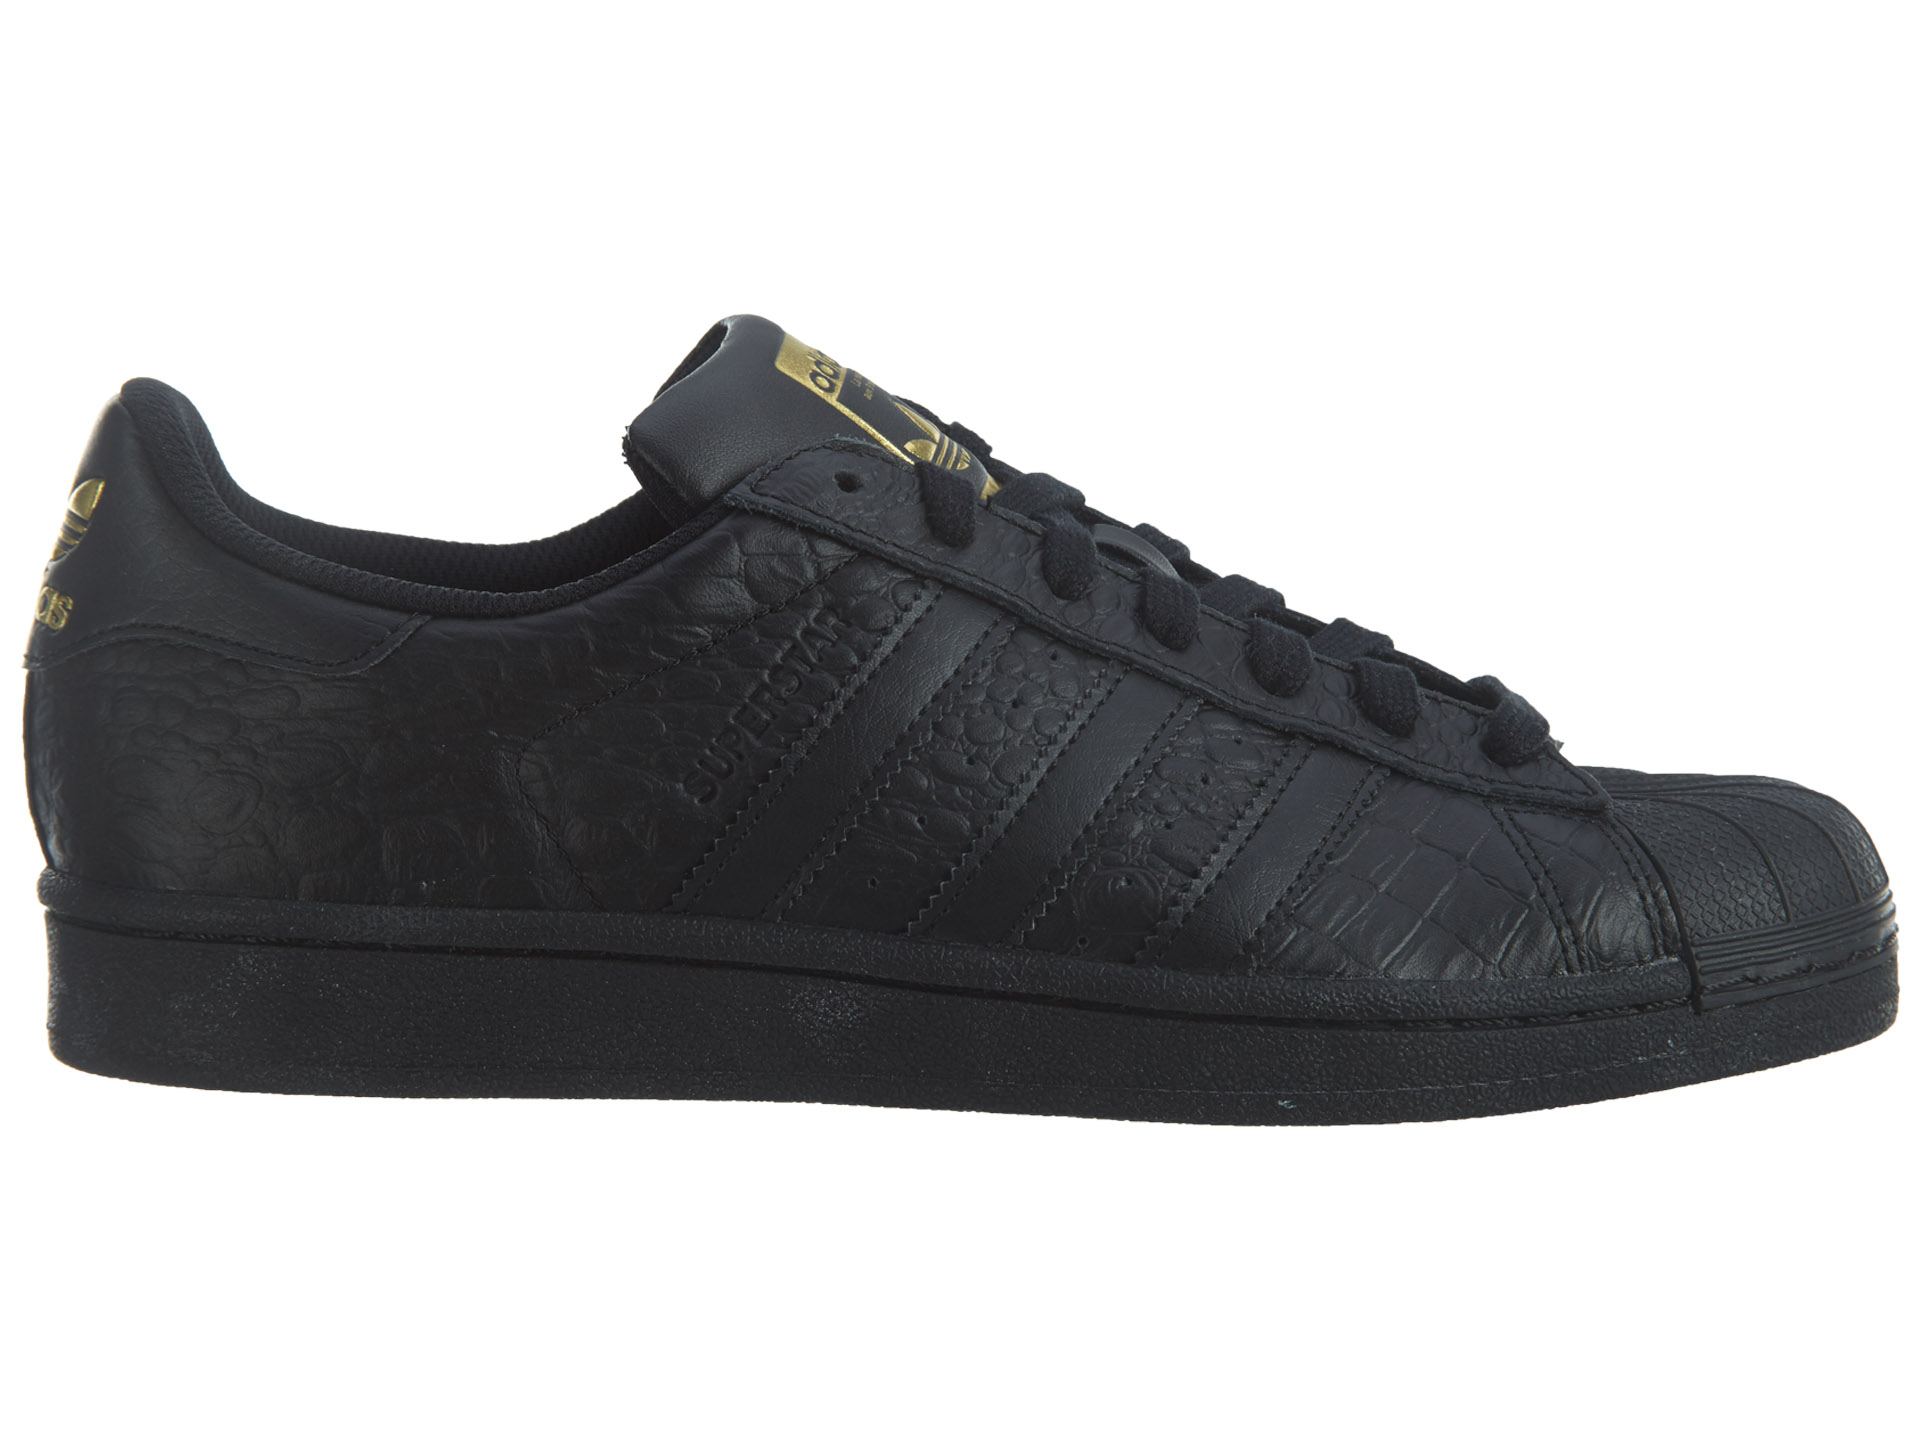 adidas superstar black and gold